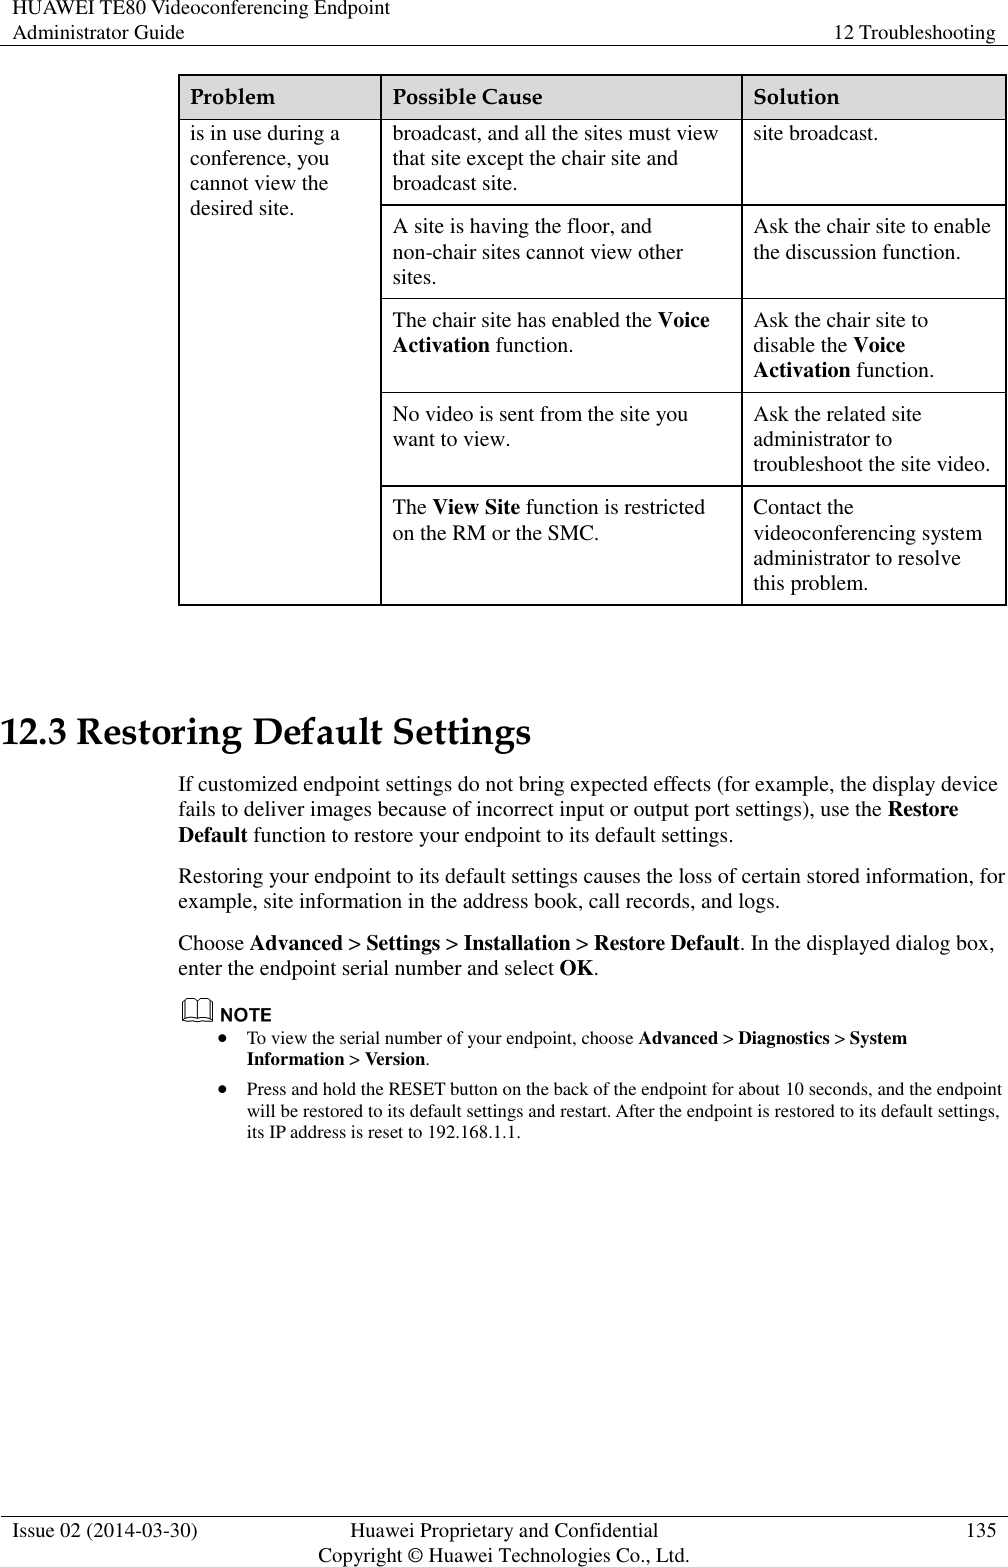 HUAWEI TE80 Videoconferencing Endpoint Administrator Guide 12 Troubleshooting  Issue 02 (2014-03-30) Huawei Proprietary and Confidential Copyright © Huawei Technologies Co., Ltd. 135  Problem Possible Cause Solution is in use during a conference, you cannot view the desired site. broadcast, and all the sites must view that site except the chair site and broadcast site. site broadcast. A site is having the floor, and non-chair sites cannot view other sites. Ask the chair site to enable the discussion function. The chair site has enabled the Voice Activation function. Ask the chair site to disable the Voice Activation function. No video is sent from the site you want to view. Ask the related site administrator to troubleshoot the site video. The View Site function is restricted on the RM or the SMC. Contact the videoconferencing system administrator to resolve this problem.  12.3 Restoring Default Settings If customized endpoint settings do not bring expected effects (for example, the display device fails to deliver images because of incorrect input or output port settings), use the Restore Default function to restore your endpoint to its default settings. Restoring your endpoint to its default settings causes the loss of certain stored information, for example, site information in the address book, call records, and logs. Choose Advanced &gt; Settings &gt; Installation &gt; Restore Default. In the displayed dialog box, enter the endpoint serial number and select OK.   To view the serial number of your endpoint, choose Advanced &gt; Diagnostics &gt; System Information &gt; Version.  Press and hold the RESET button on the back of the endpoint for about 10 seconds, and the endpoint will be restored to its default settings and restart. After the endpoint is restored to its default settings, its IP address is reset to 192.168.1.1.   